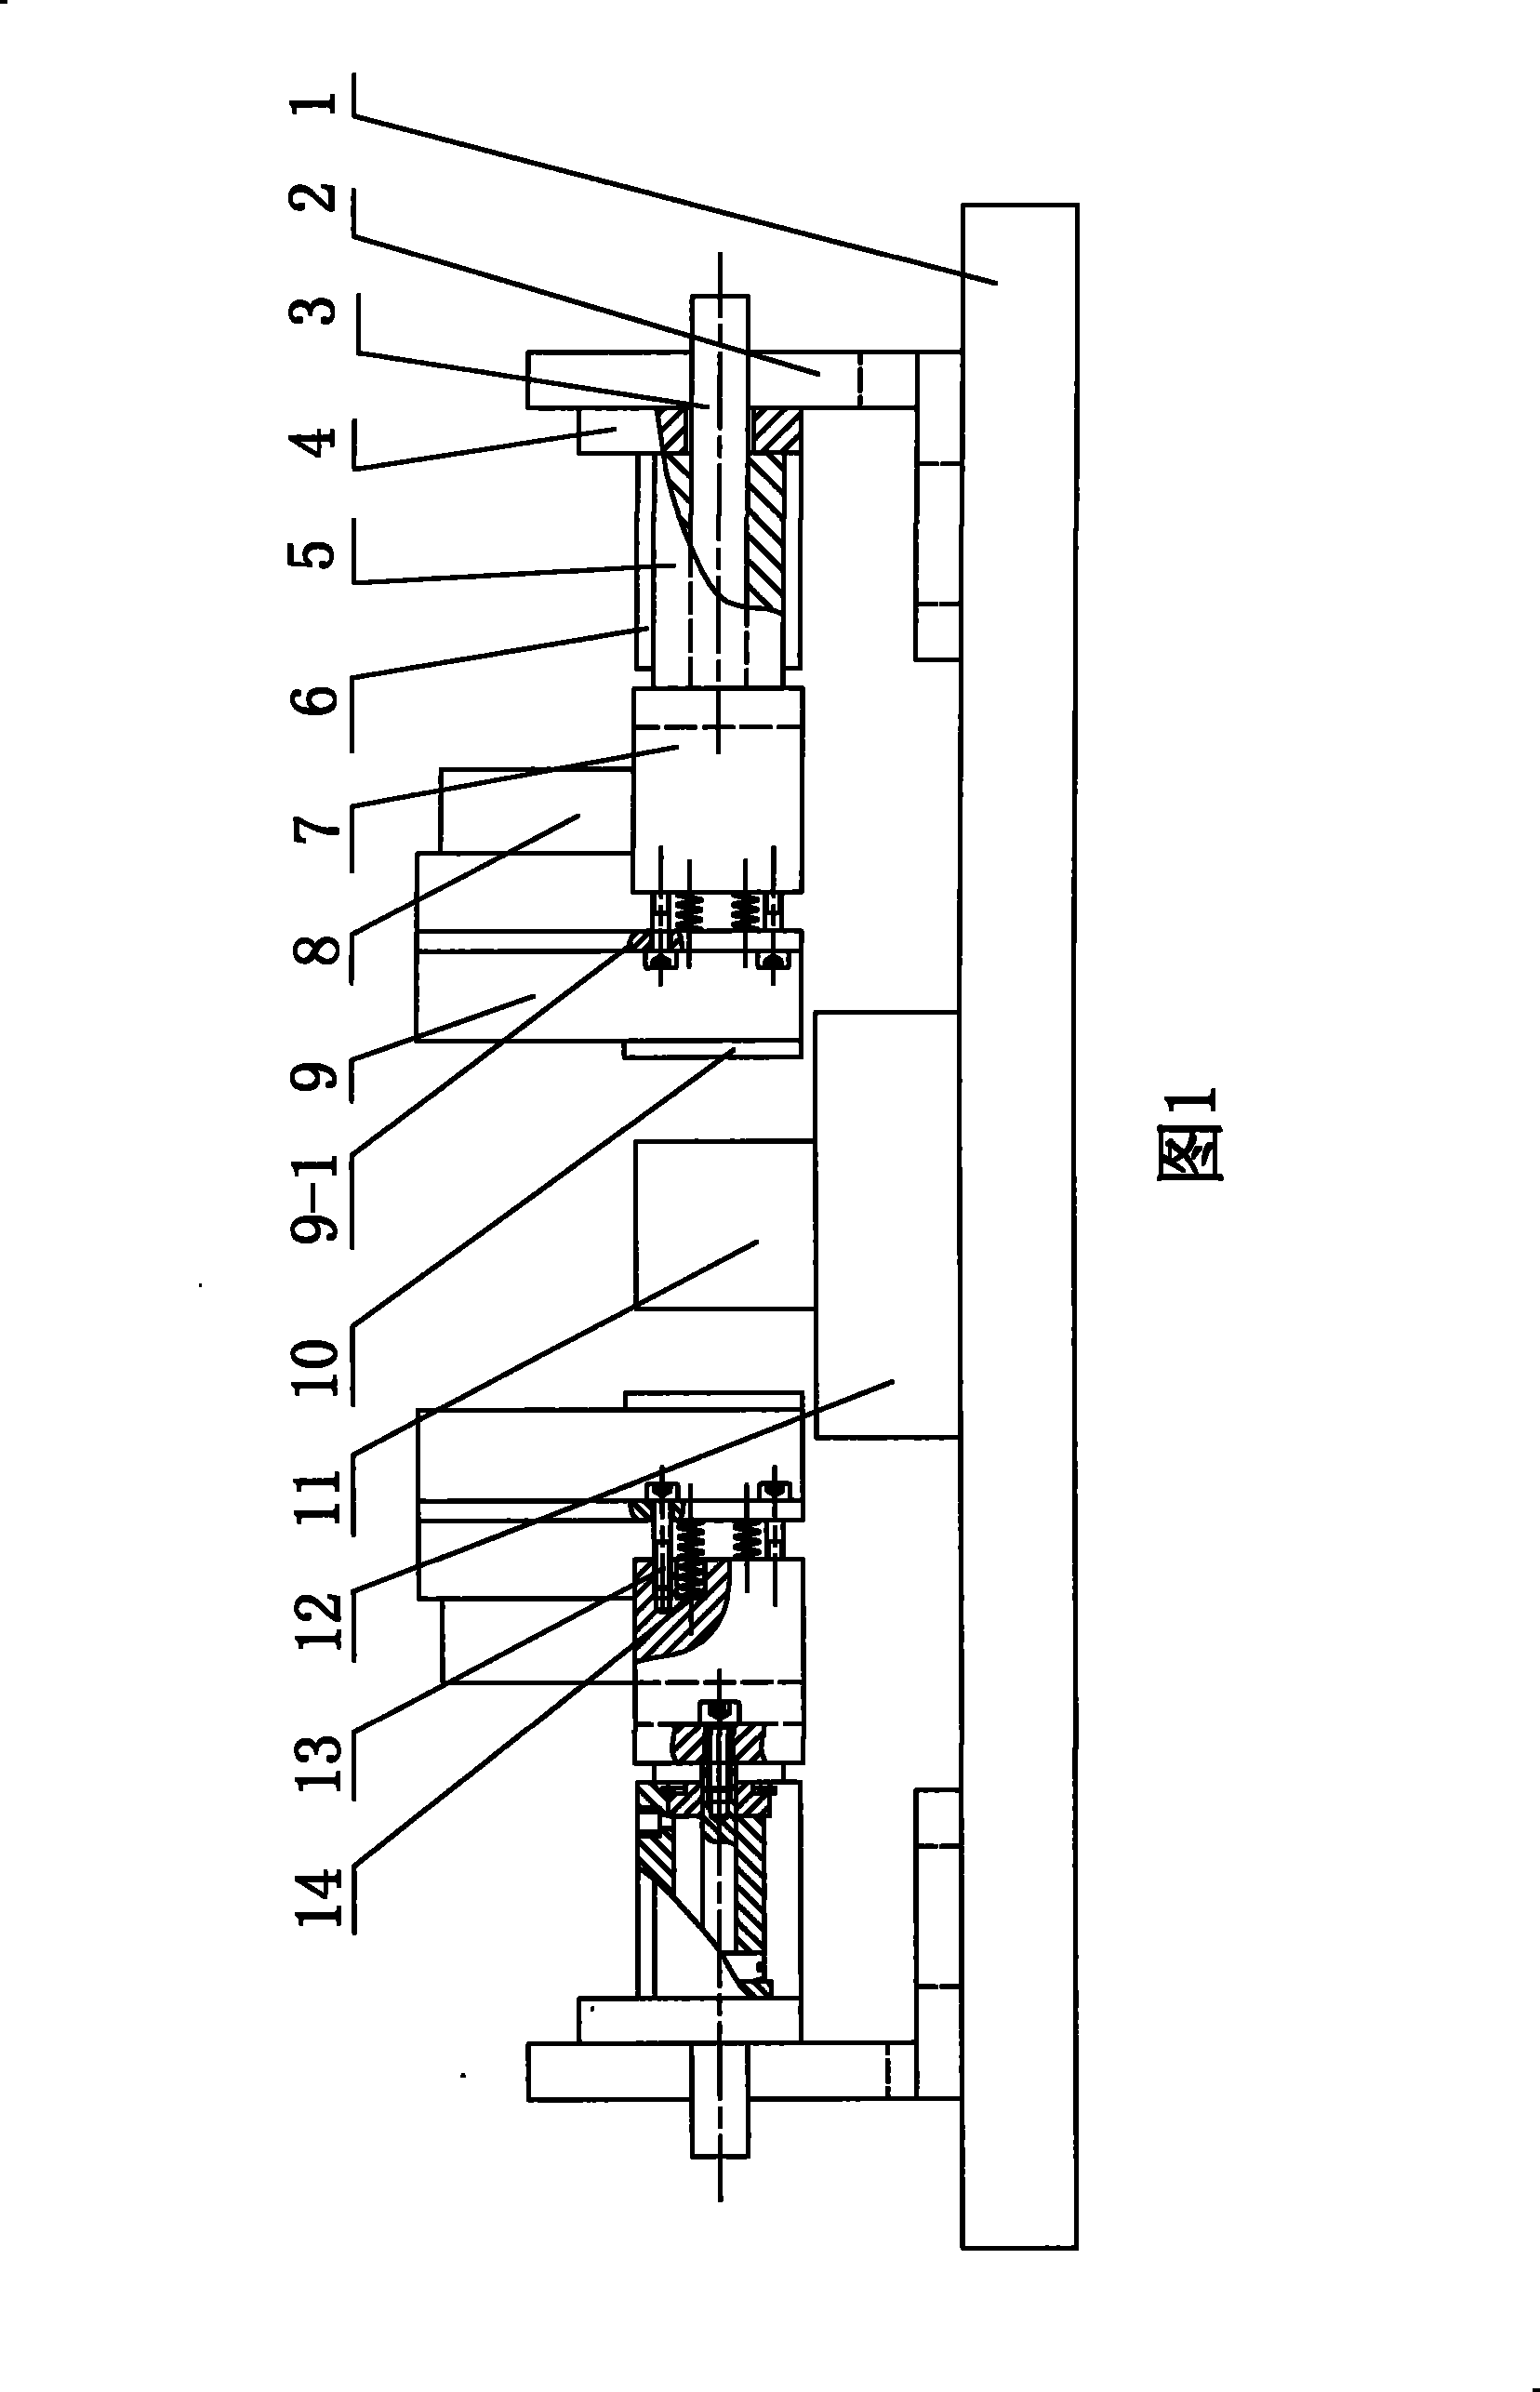 Heat conduction mechanism for temperature compensation test device of weighting transducer